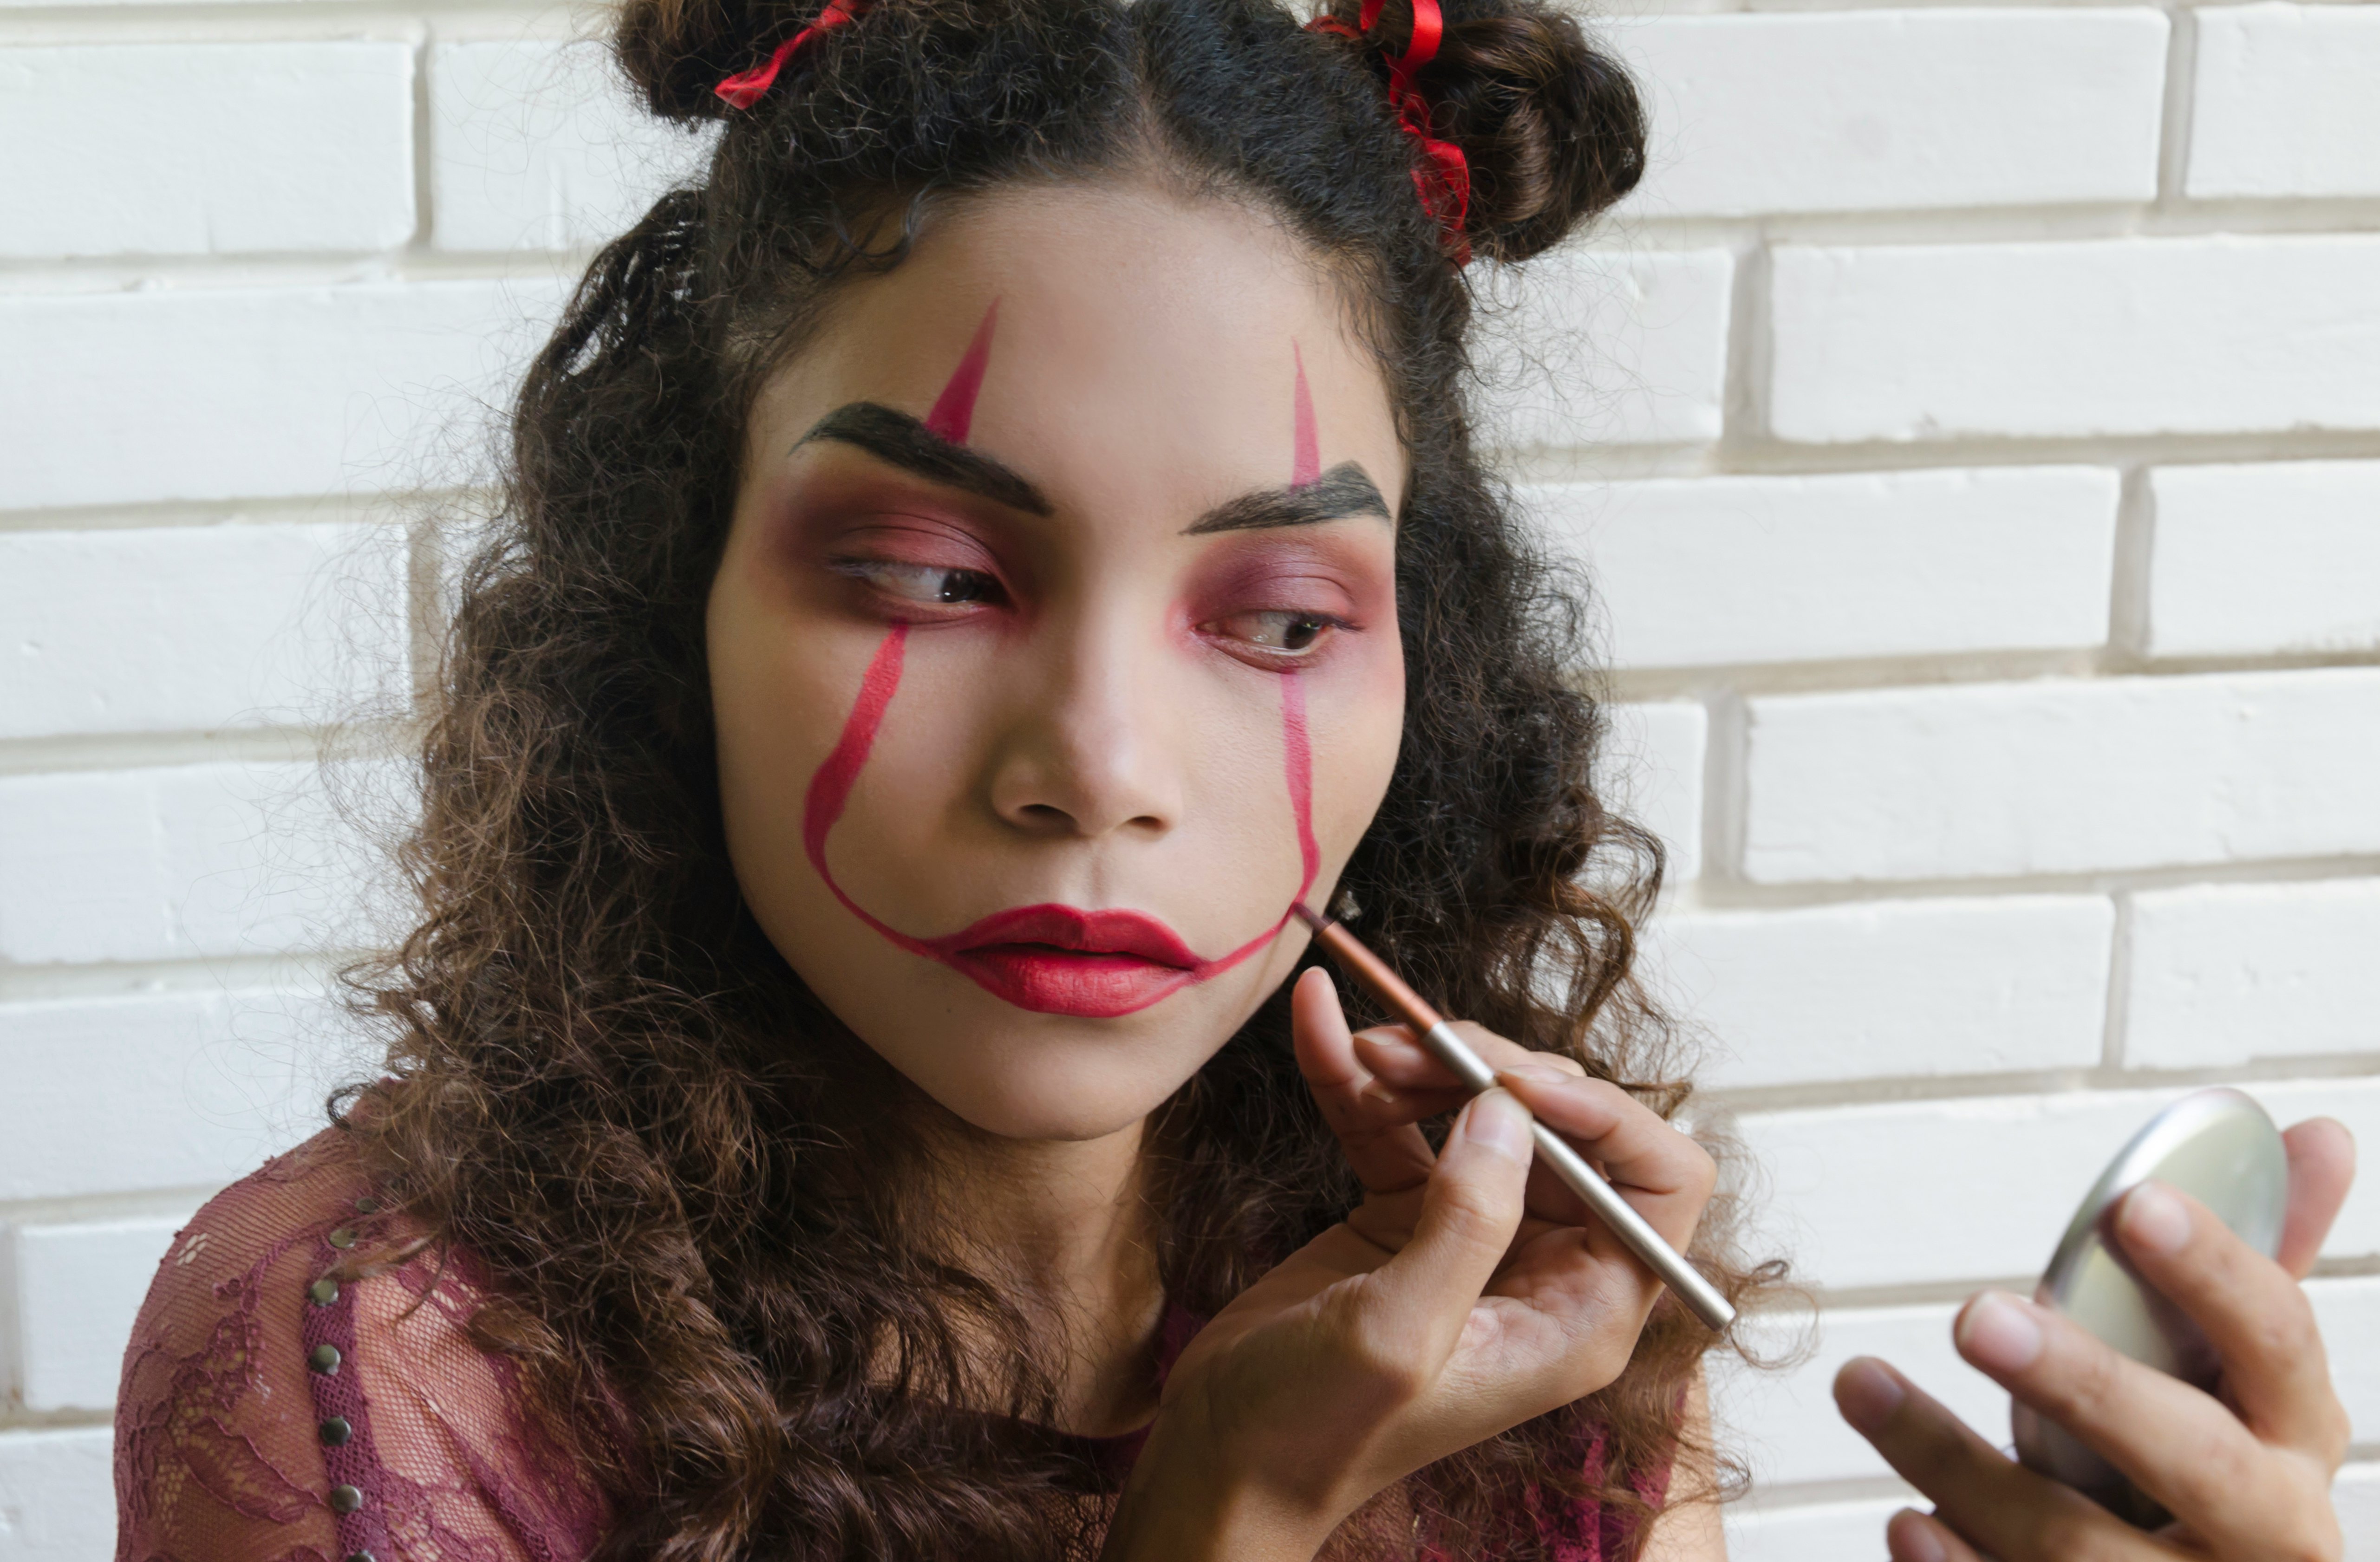 Scary Looks with Makeup: Unleash Your Inner Monster and Impress! Click Here to Learn How!